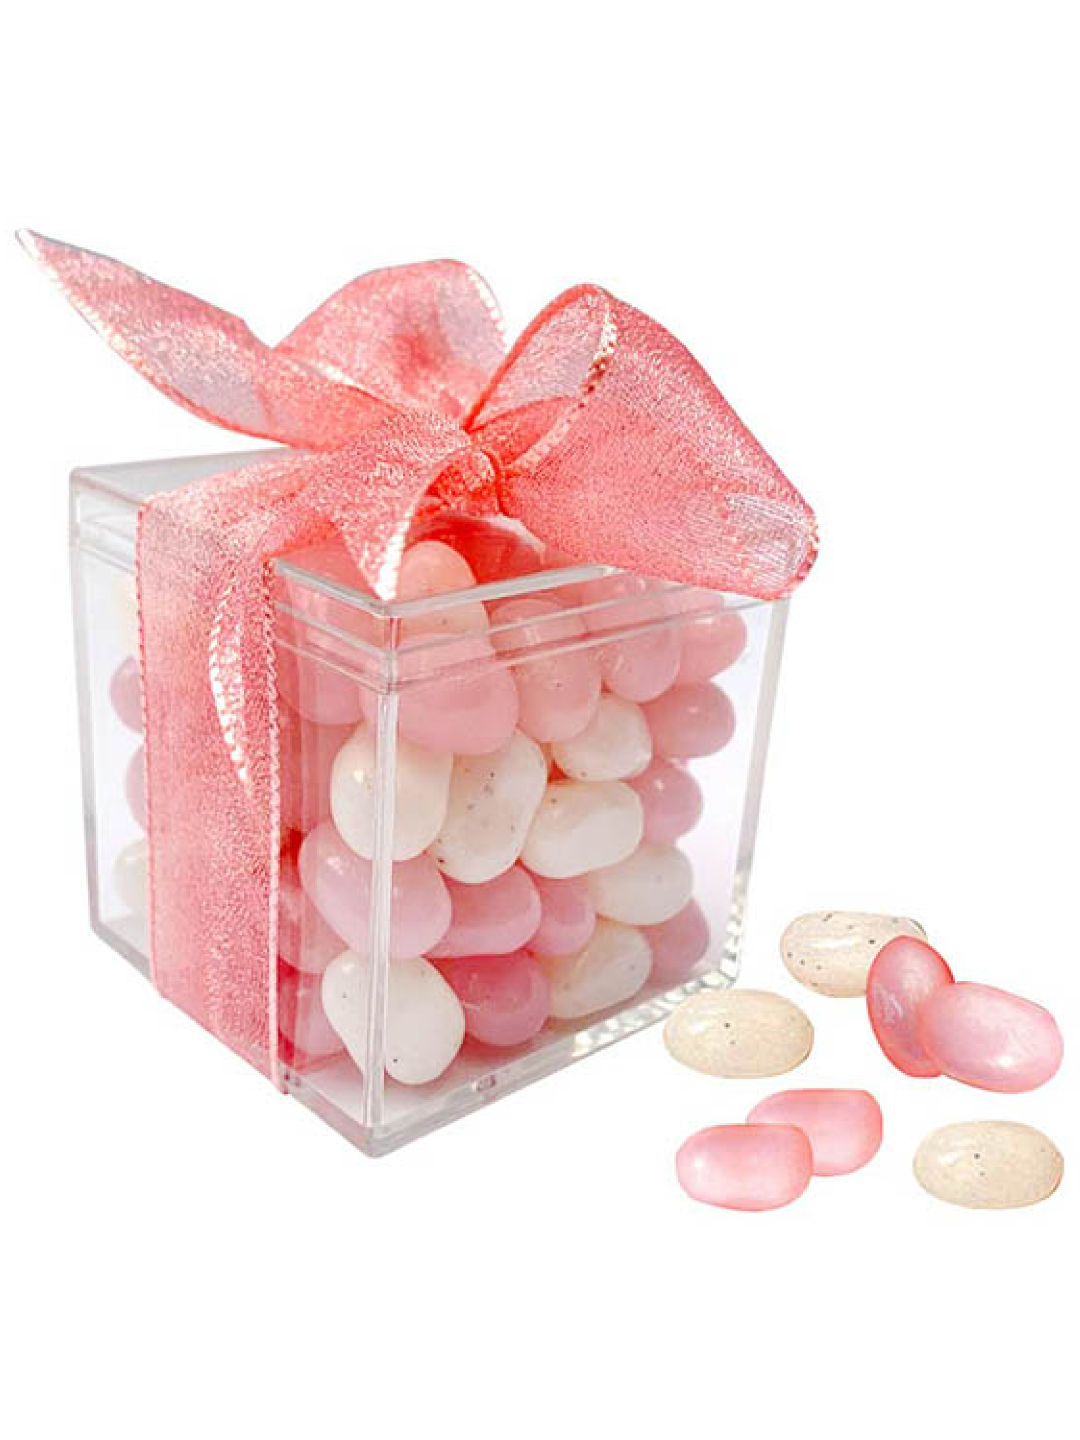 Candy Corner Jelly Belly in Candy Cube (90g) (No Color- Image 1)